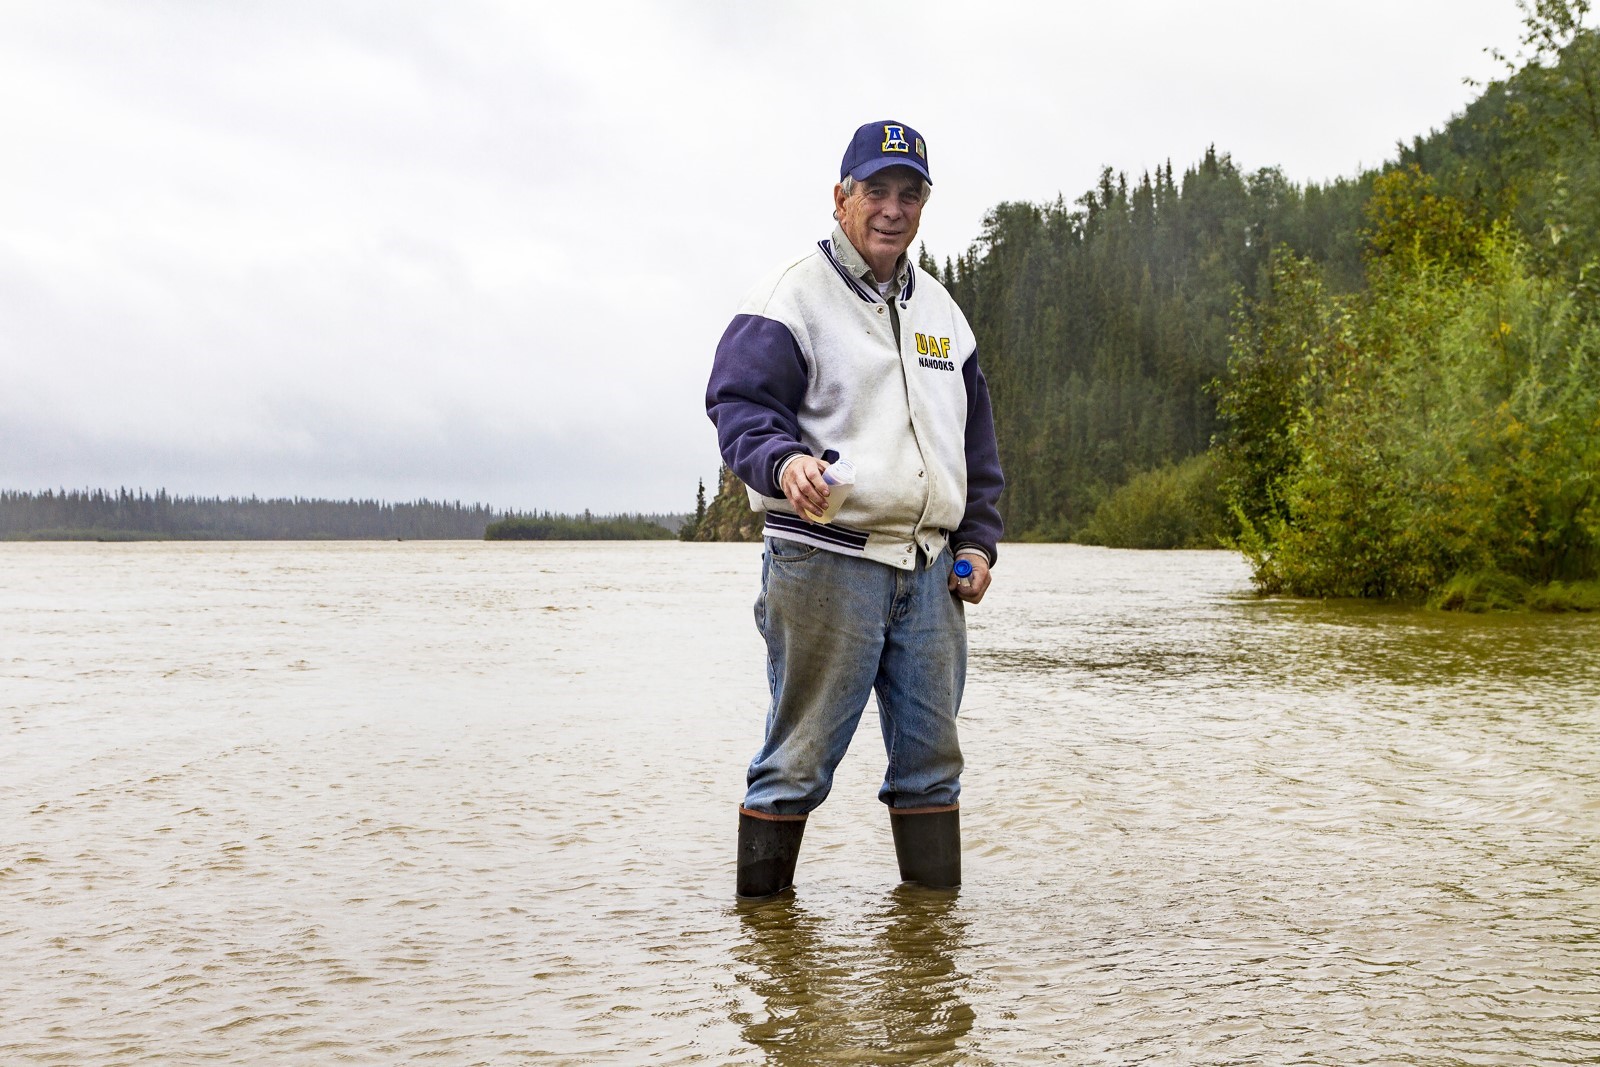 Man standing in a river, wearing waders and holding a fishing rod. They are wearing a jacket and hat with the logo 'Bass Pro Shops'. The background features a forest and overcast sky.